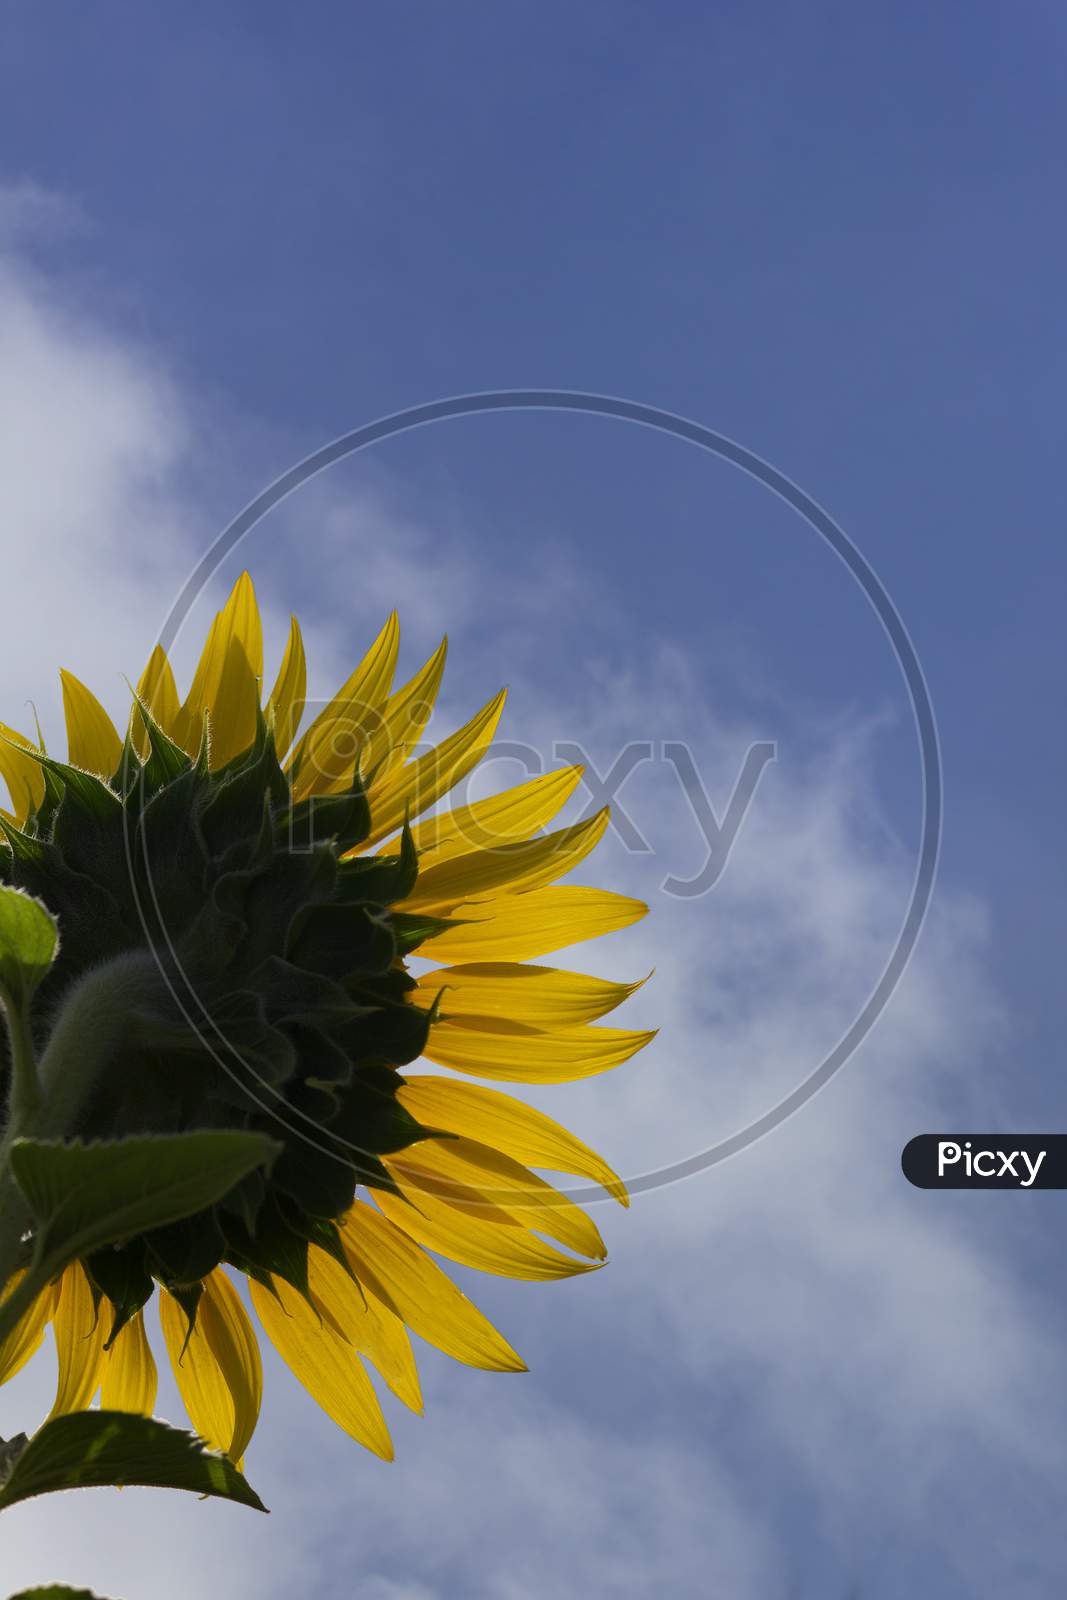 Sunflowers Blooming In an Agricultural Field Background